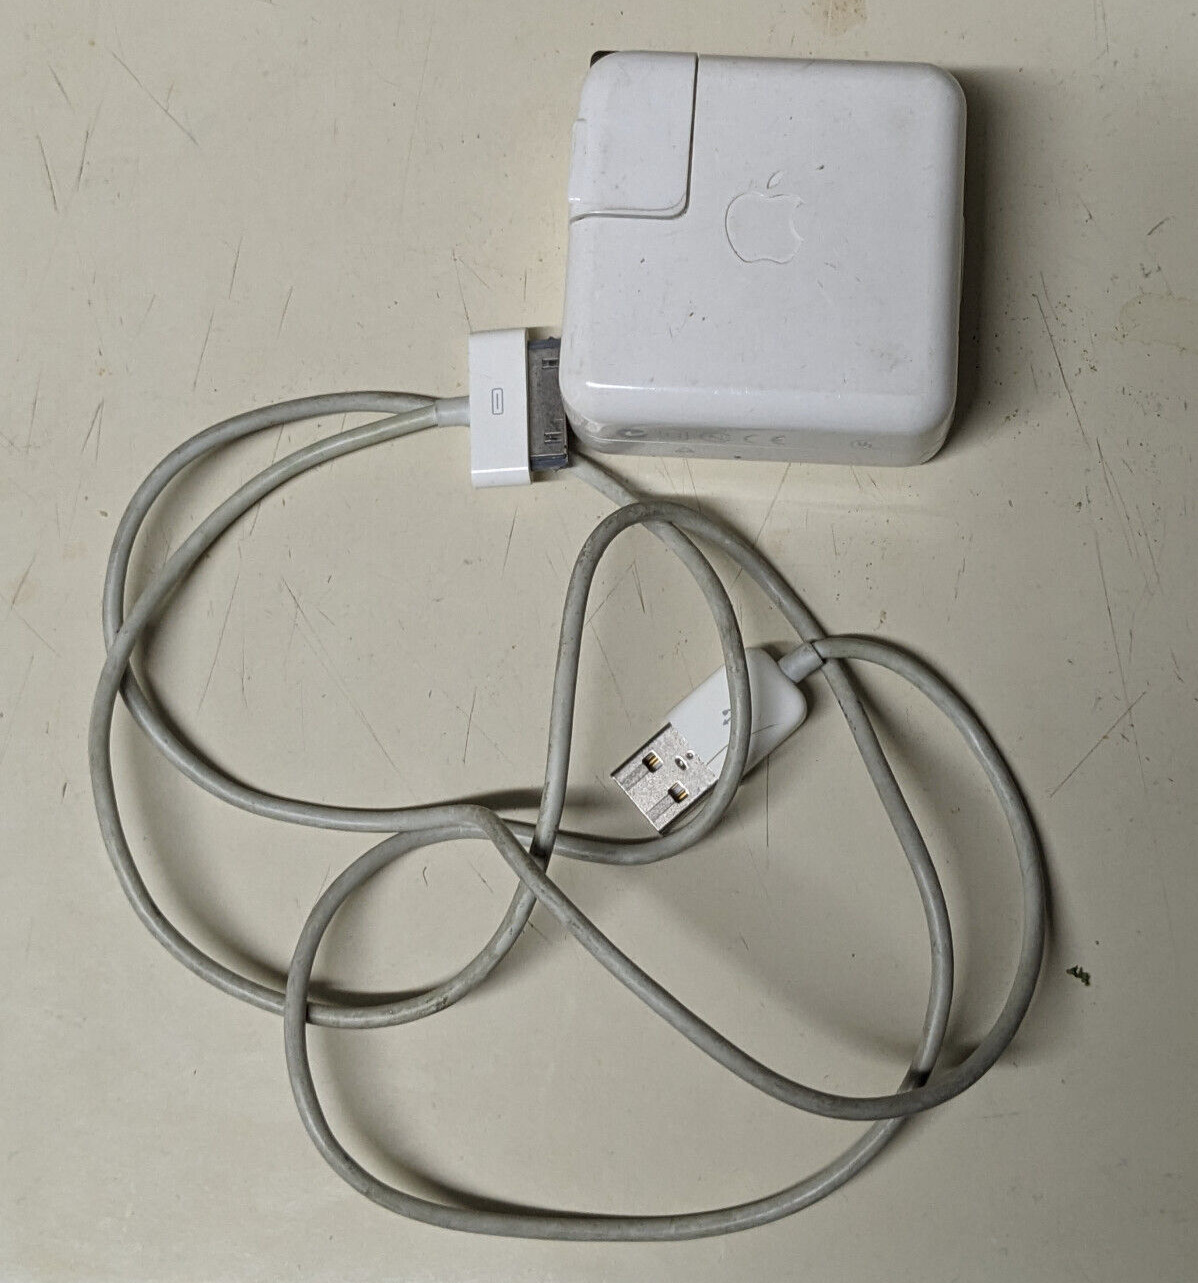 Genuine Apple A1102 IPod USB Power Adapter w/ 30-Pin USB cable 5V 1A old iphone